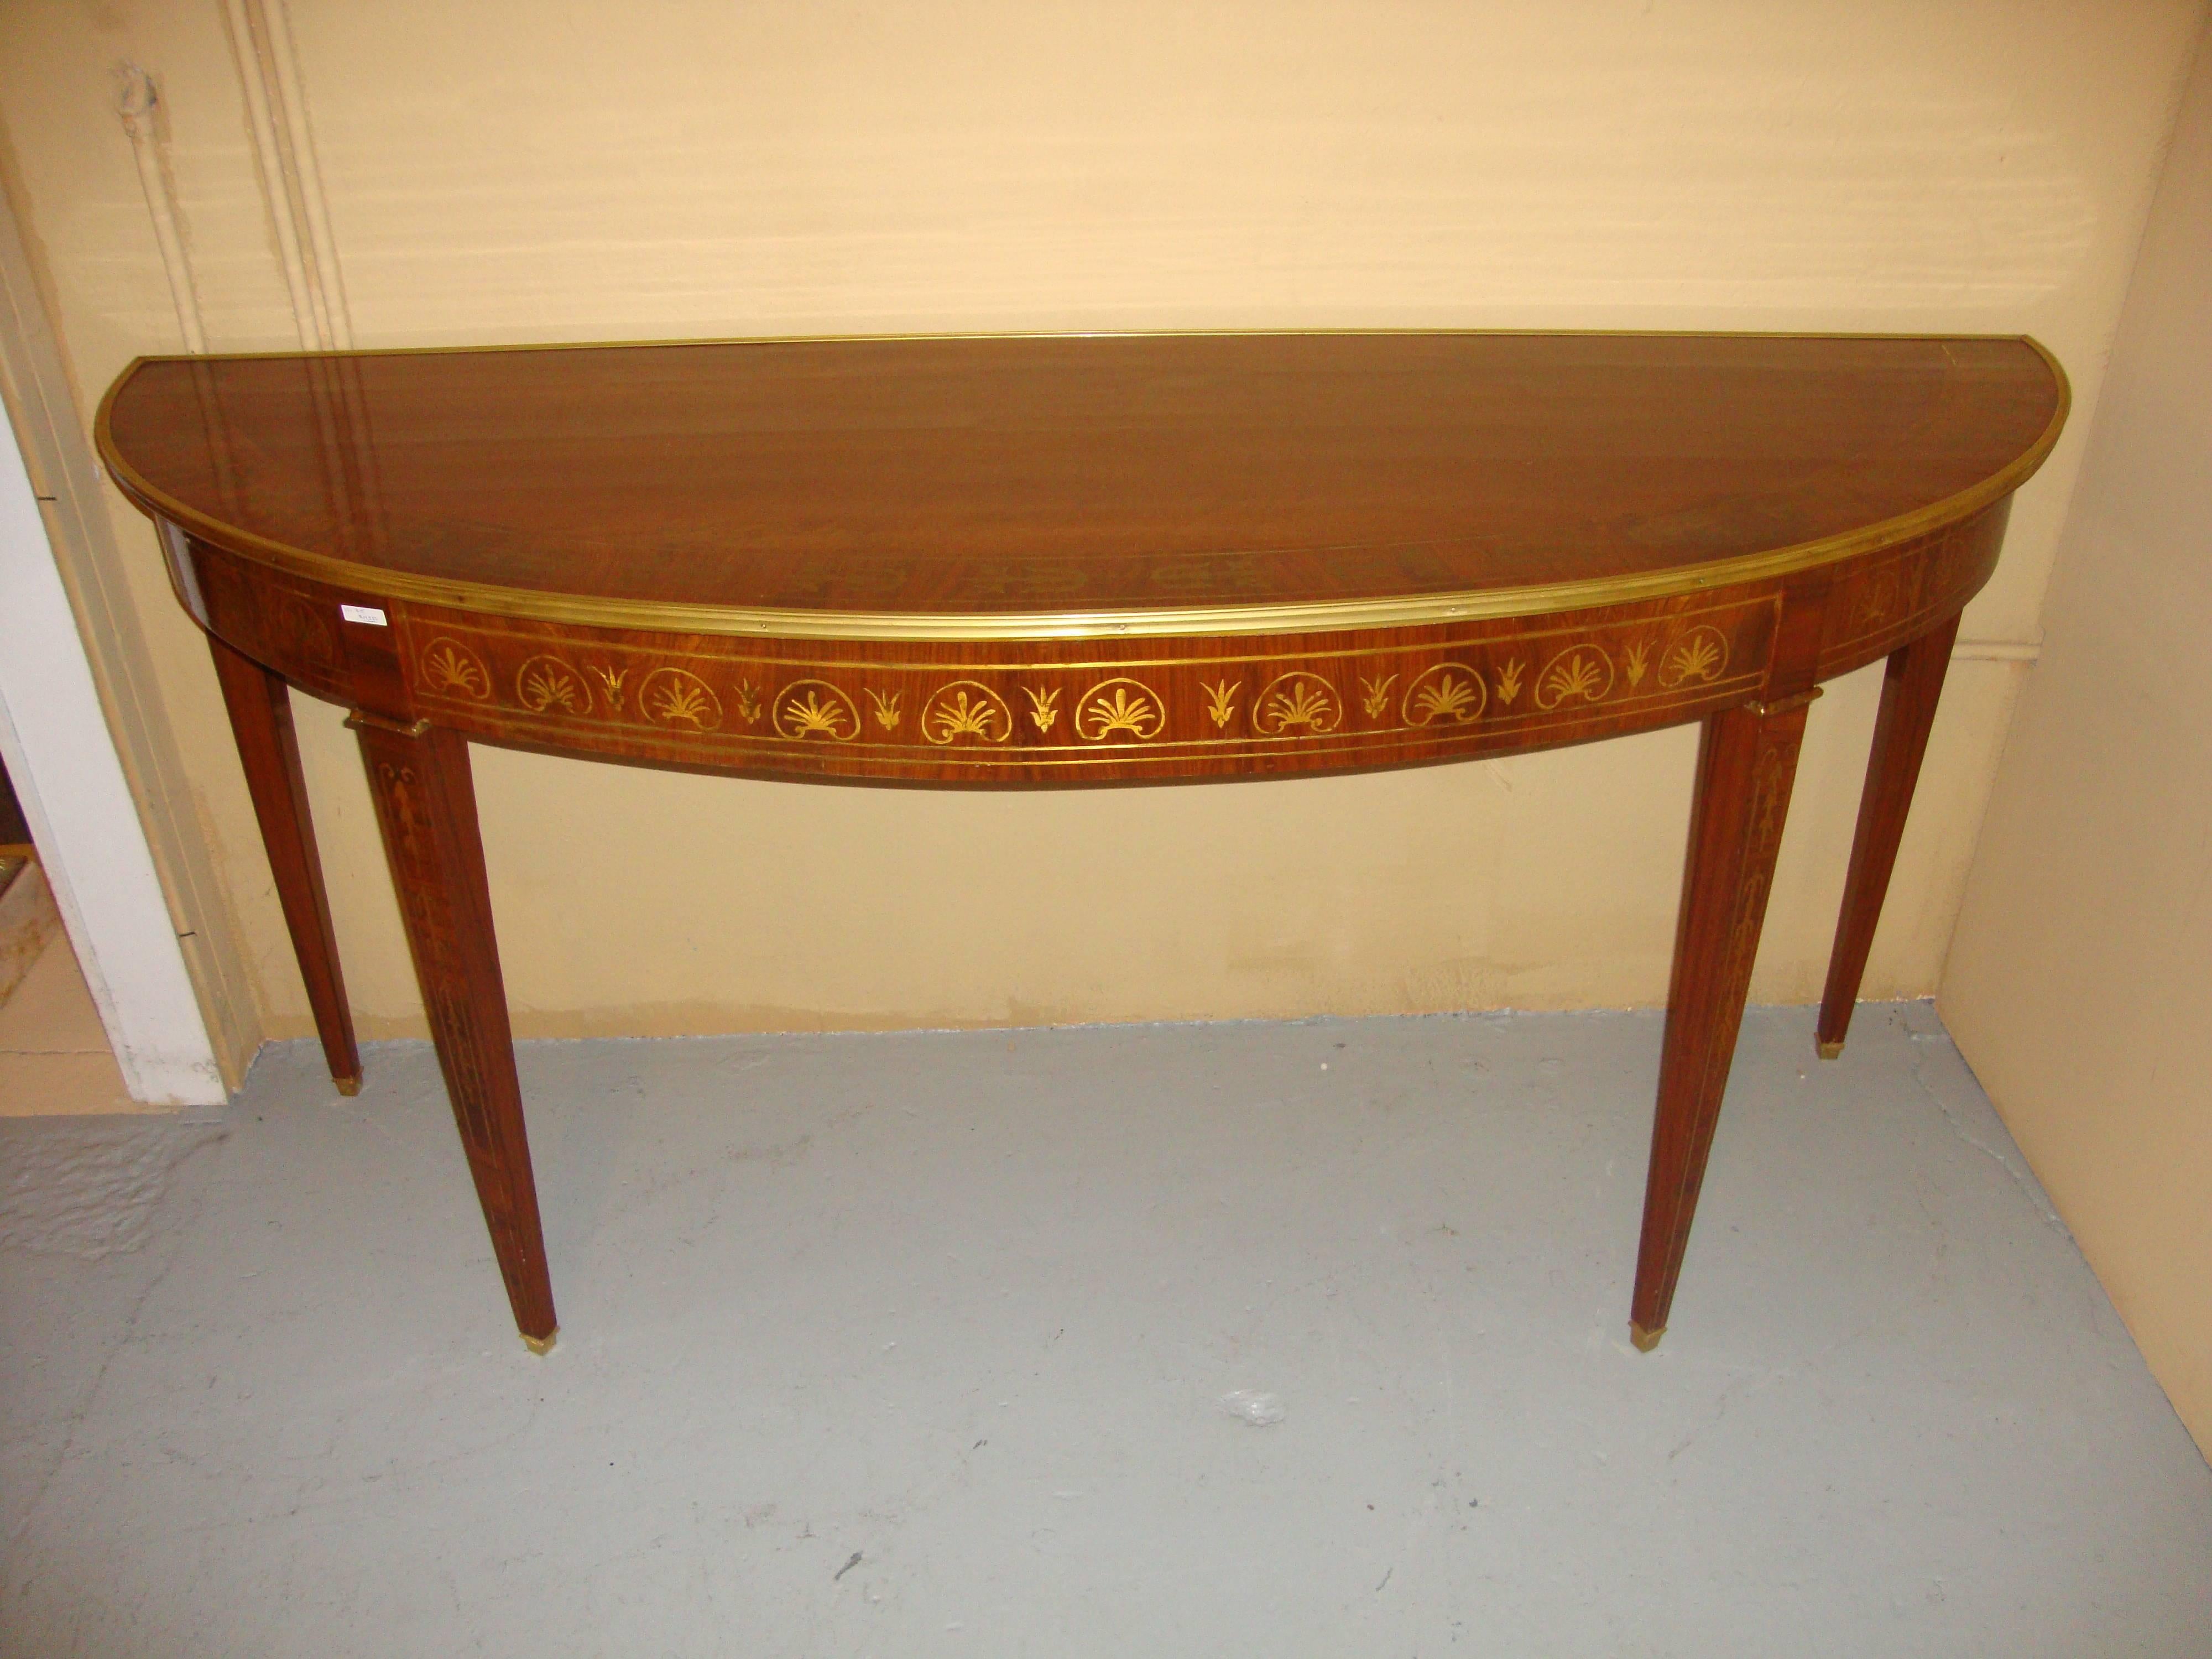 Neoclassical, Demilune Console Tables, Brown Wood, Brass Inlay, Europe, 1970s For Sale 3